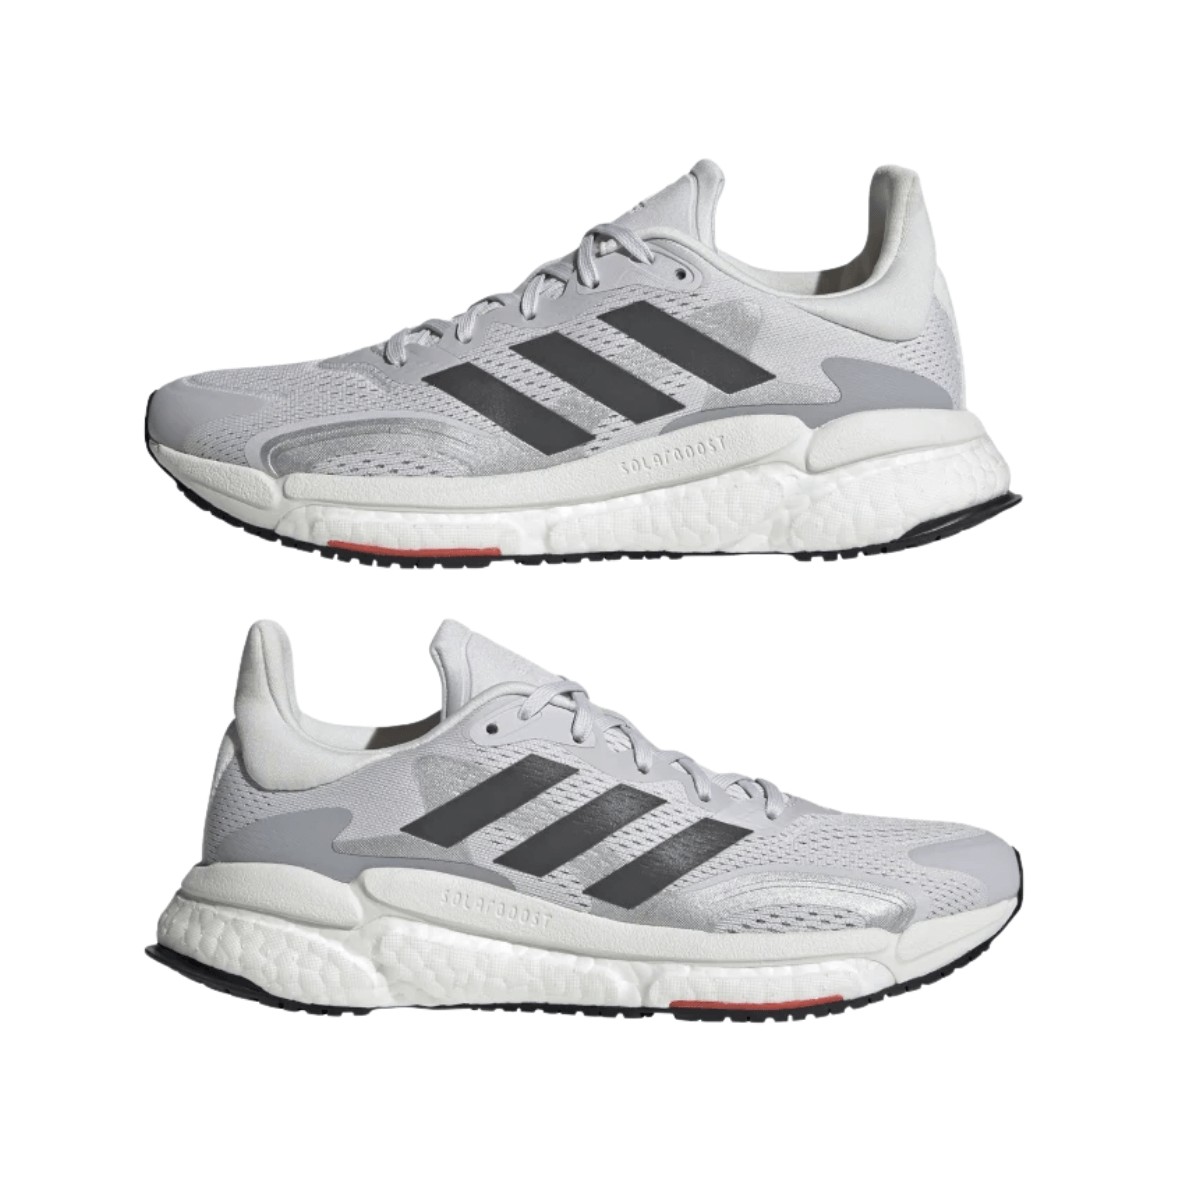 Adidas Solar Boost Gris AW 21 Mujer